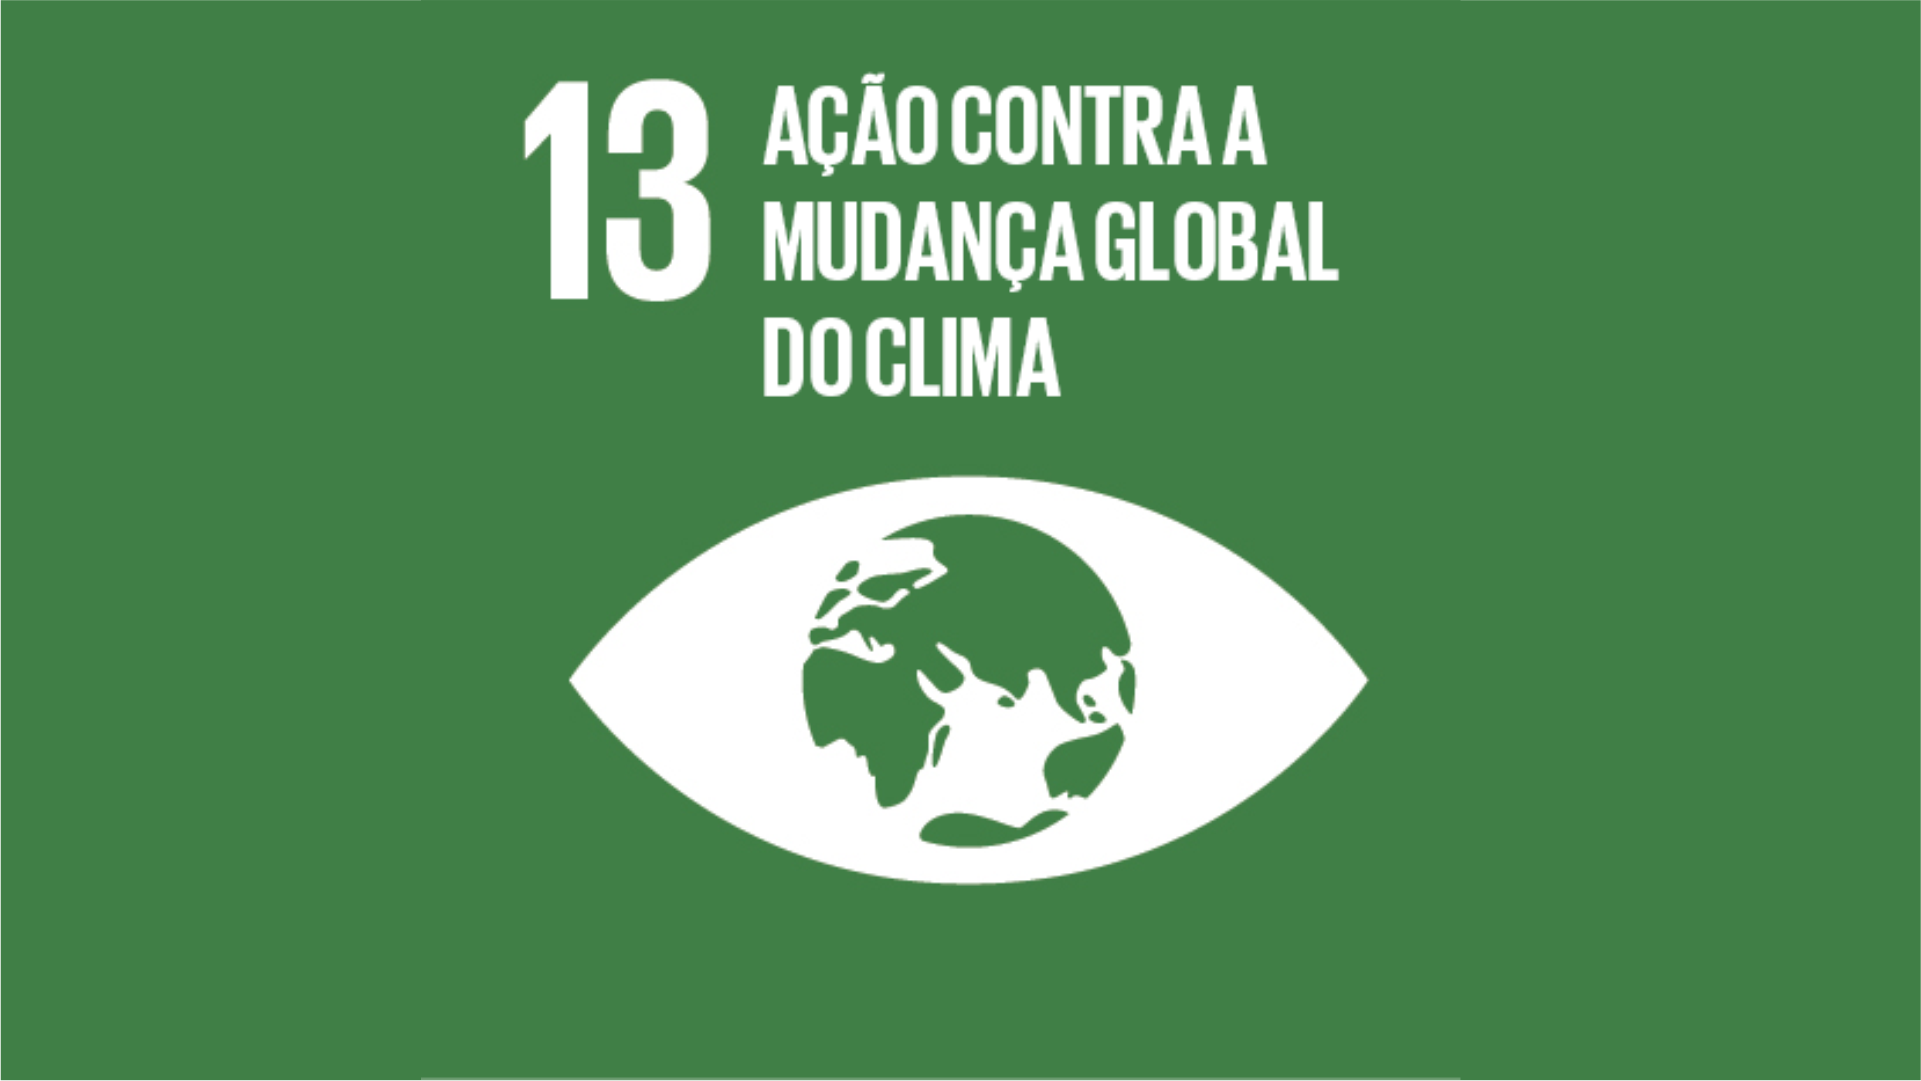 Goal 13 - Action Against Global Climate Change